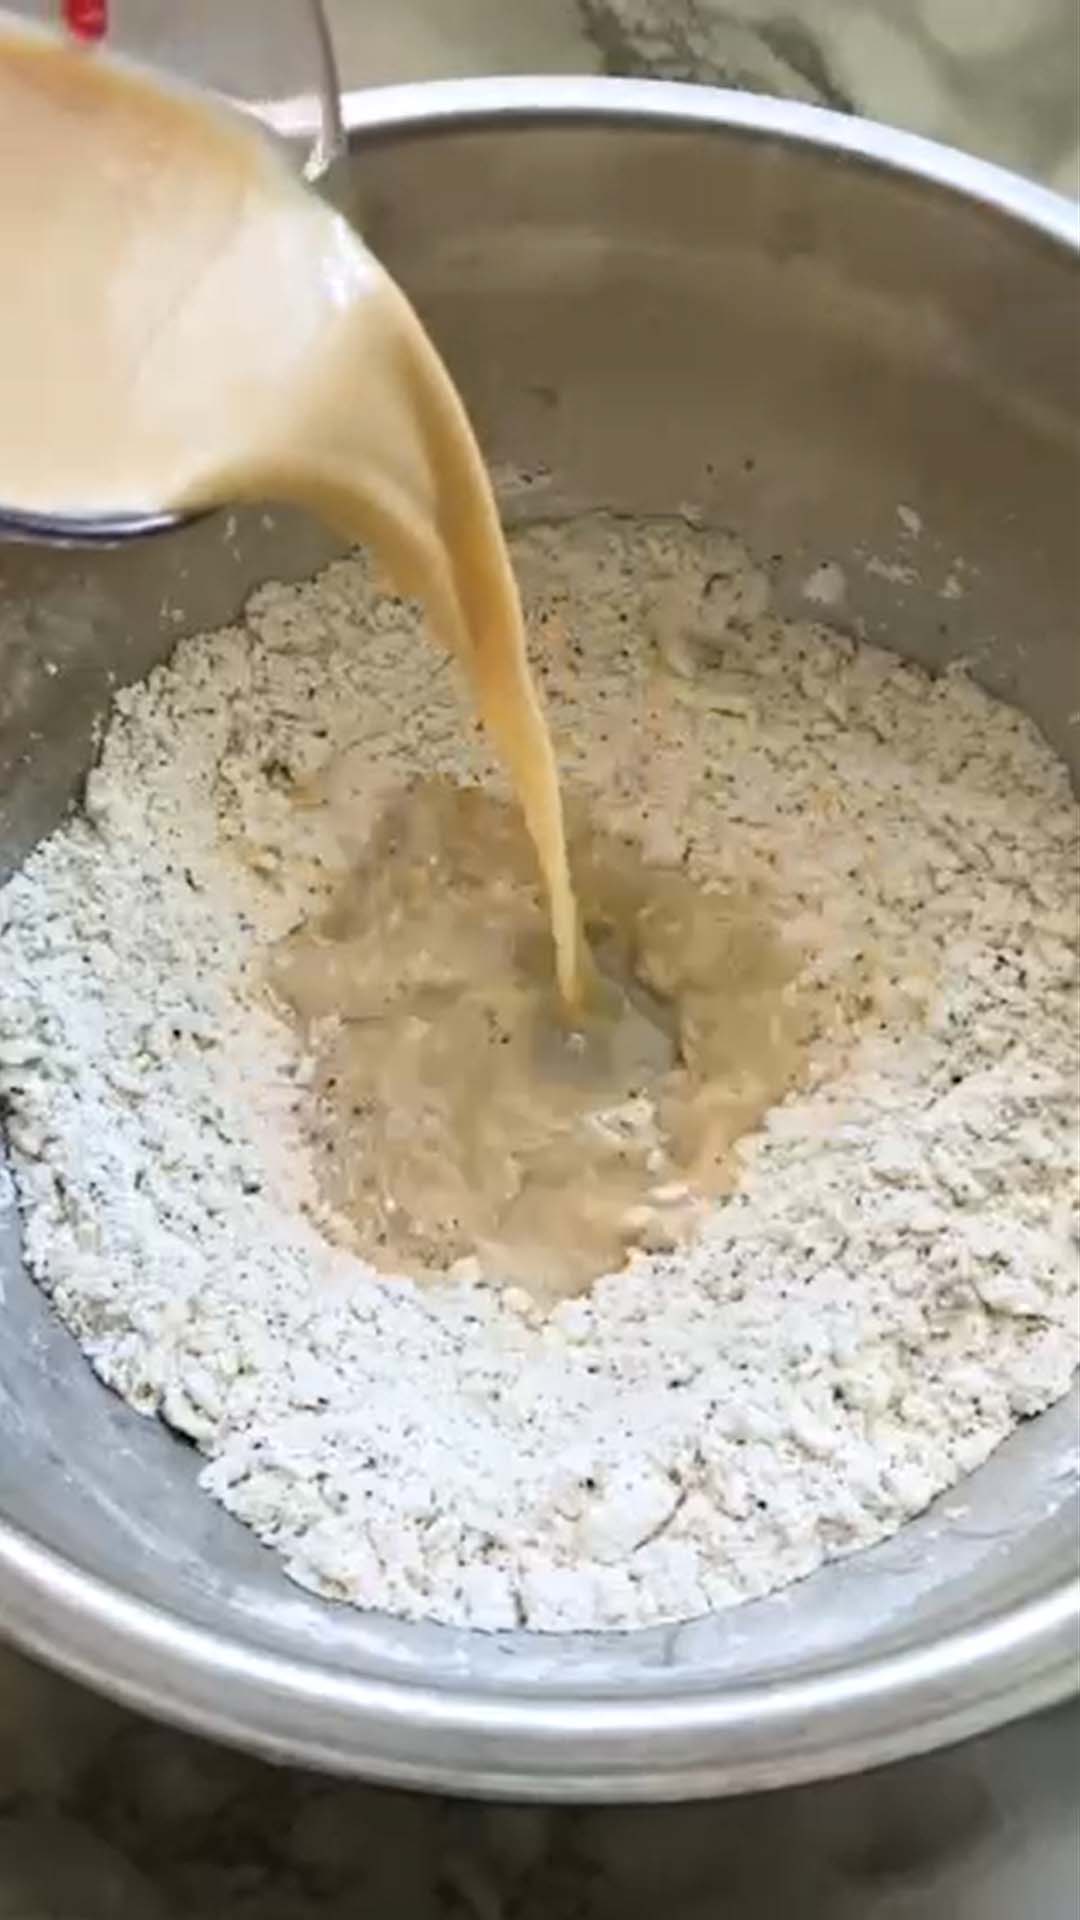 Pouring liquid in buttered flour for scones.